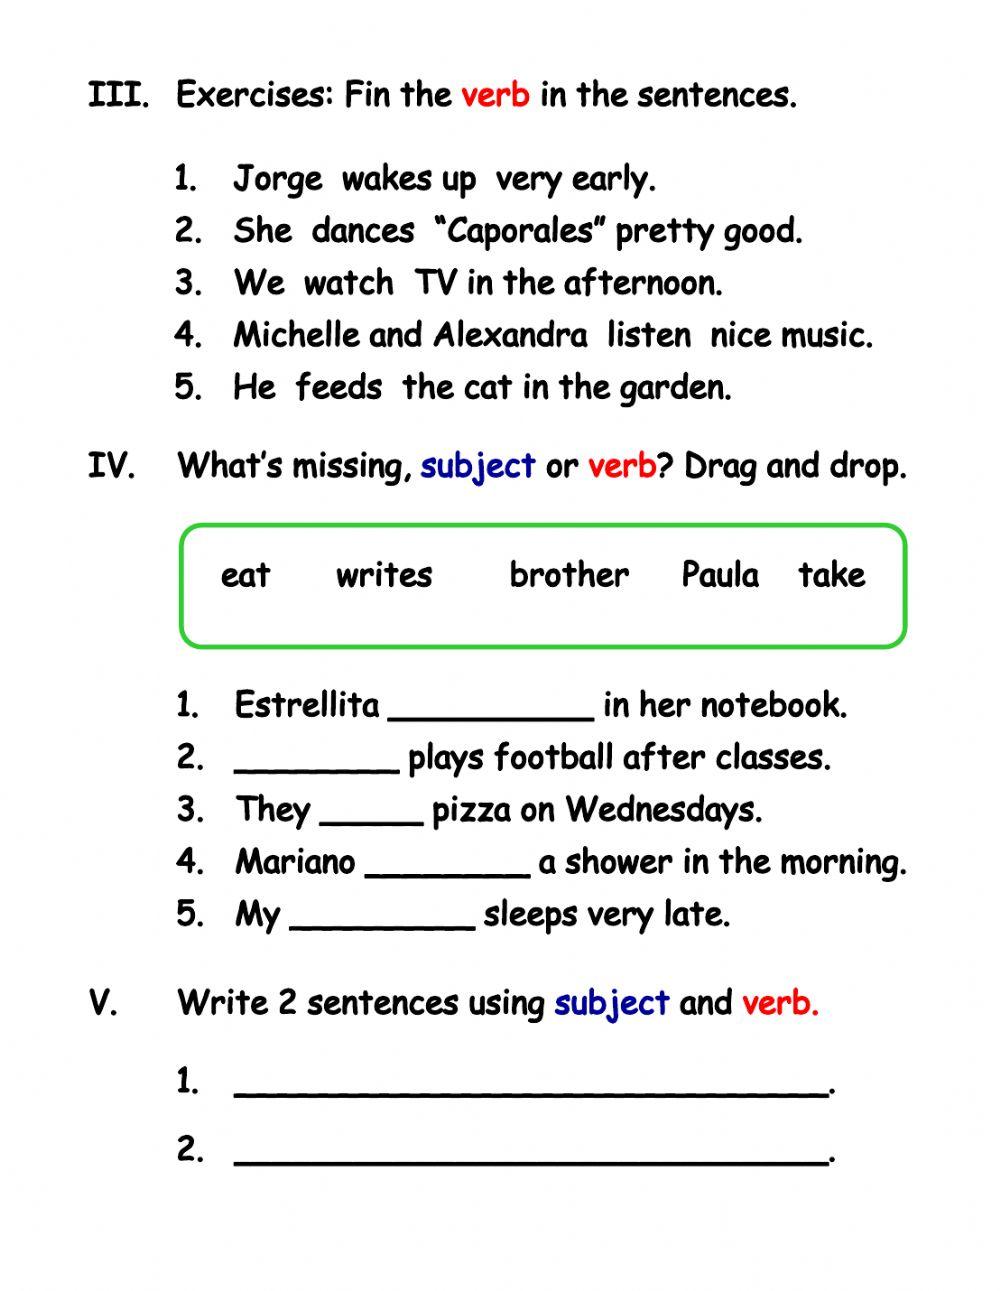 Subject and verb